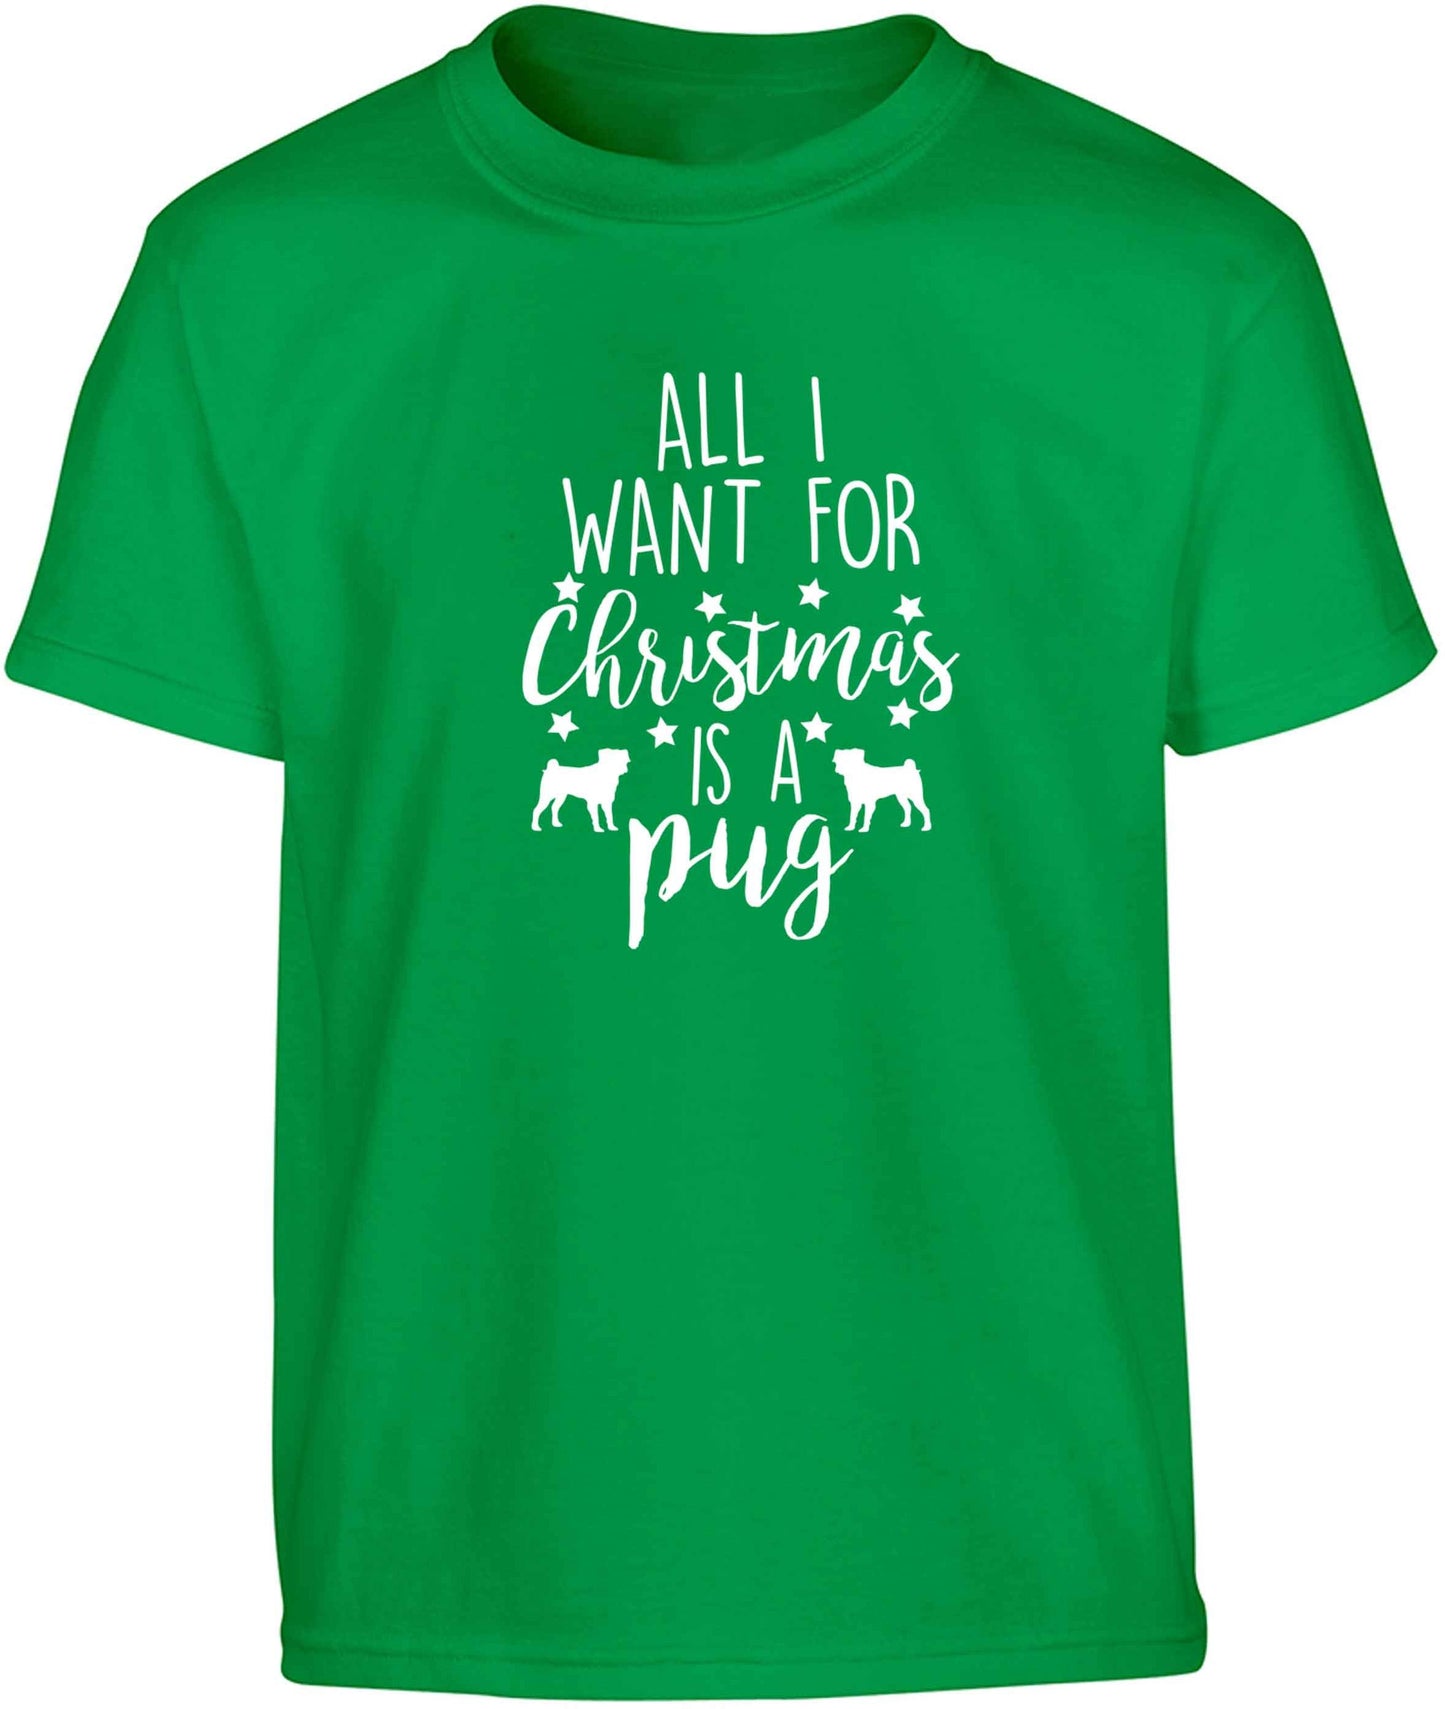 All I want for Christmas is a pug Children's green Tshirt 12-13 Years